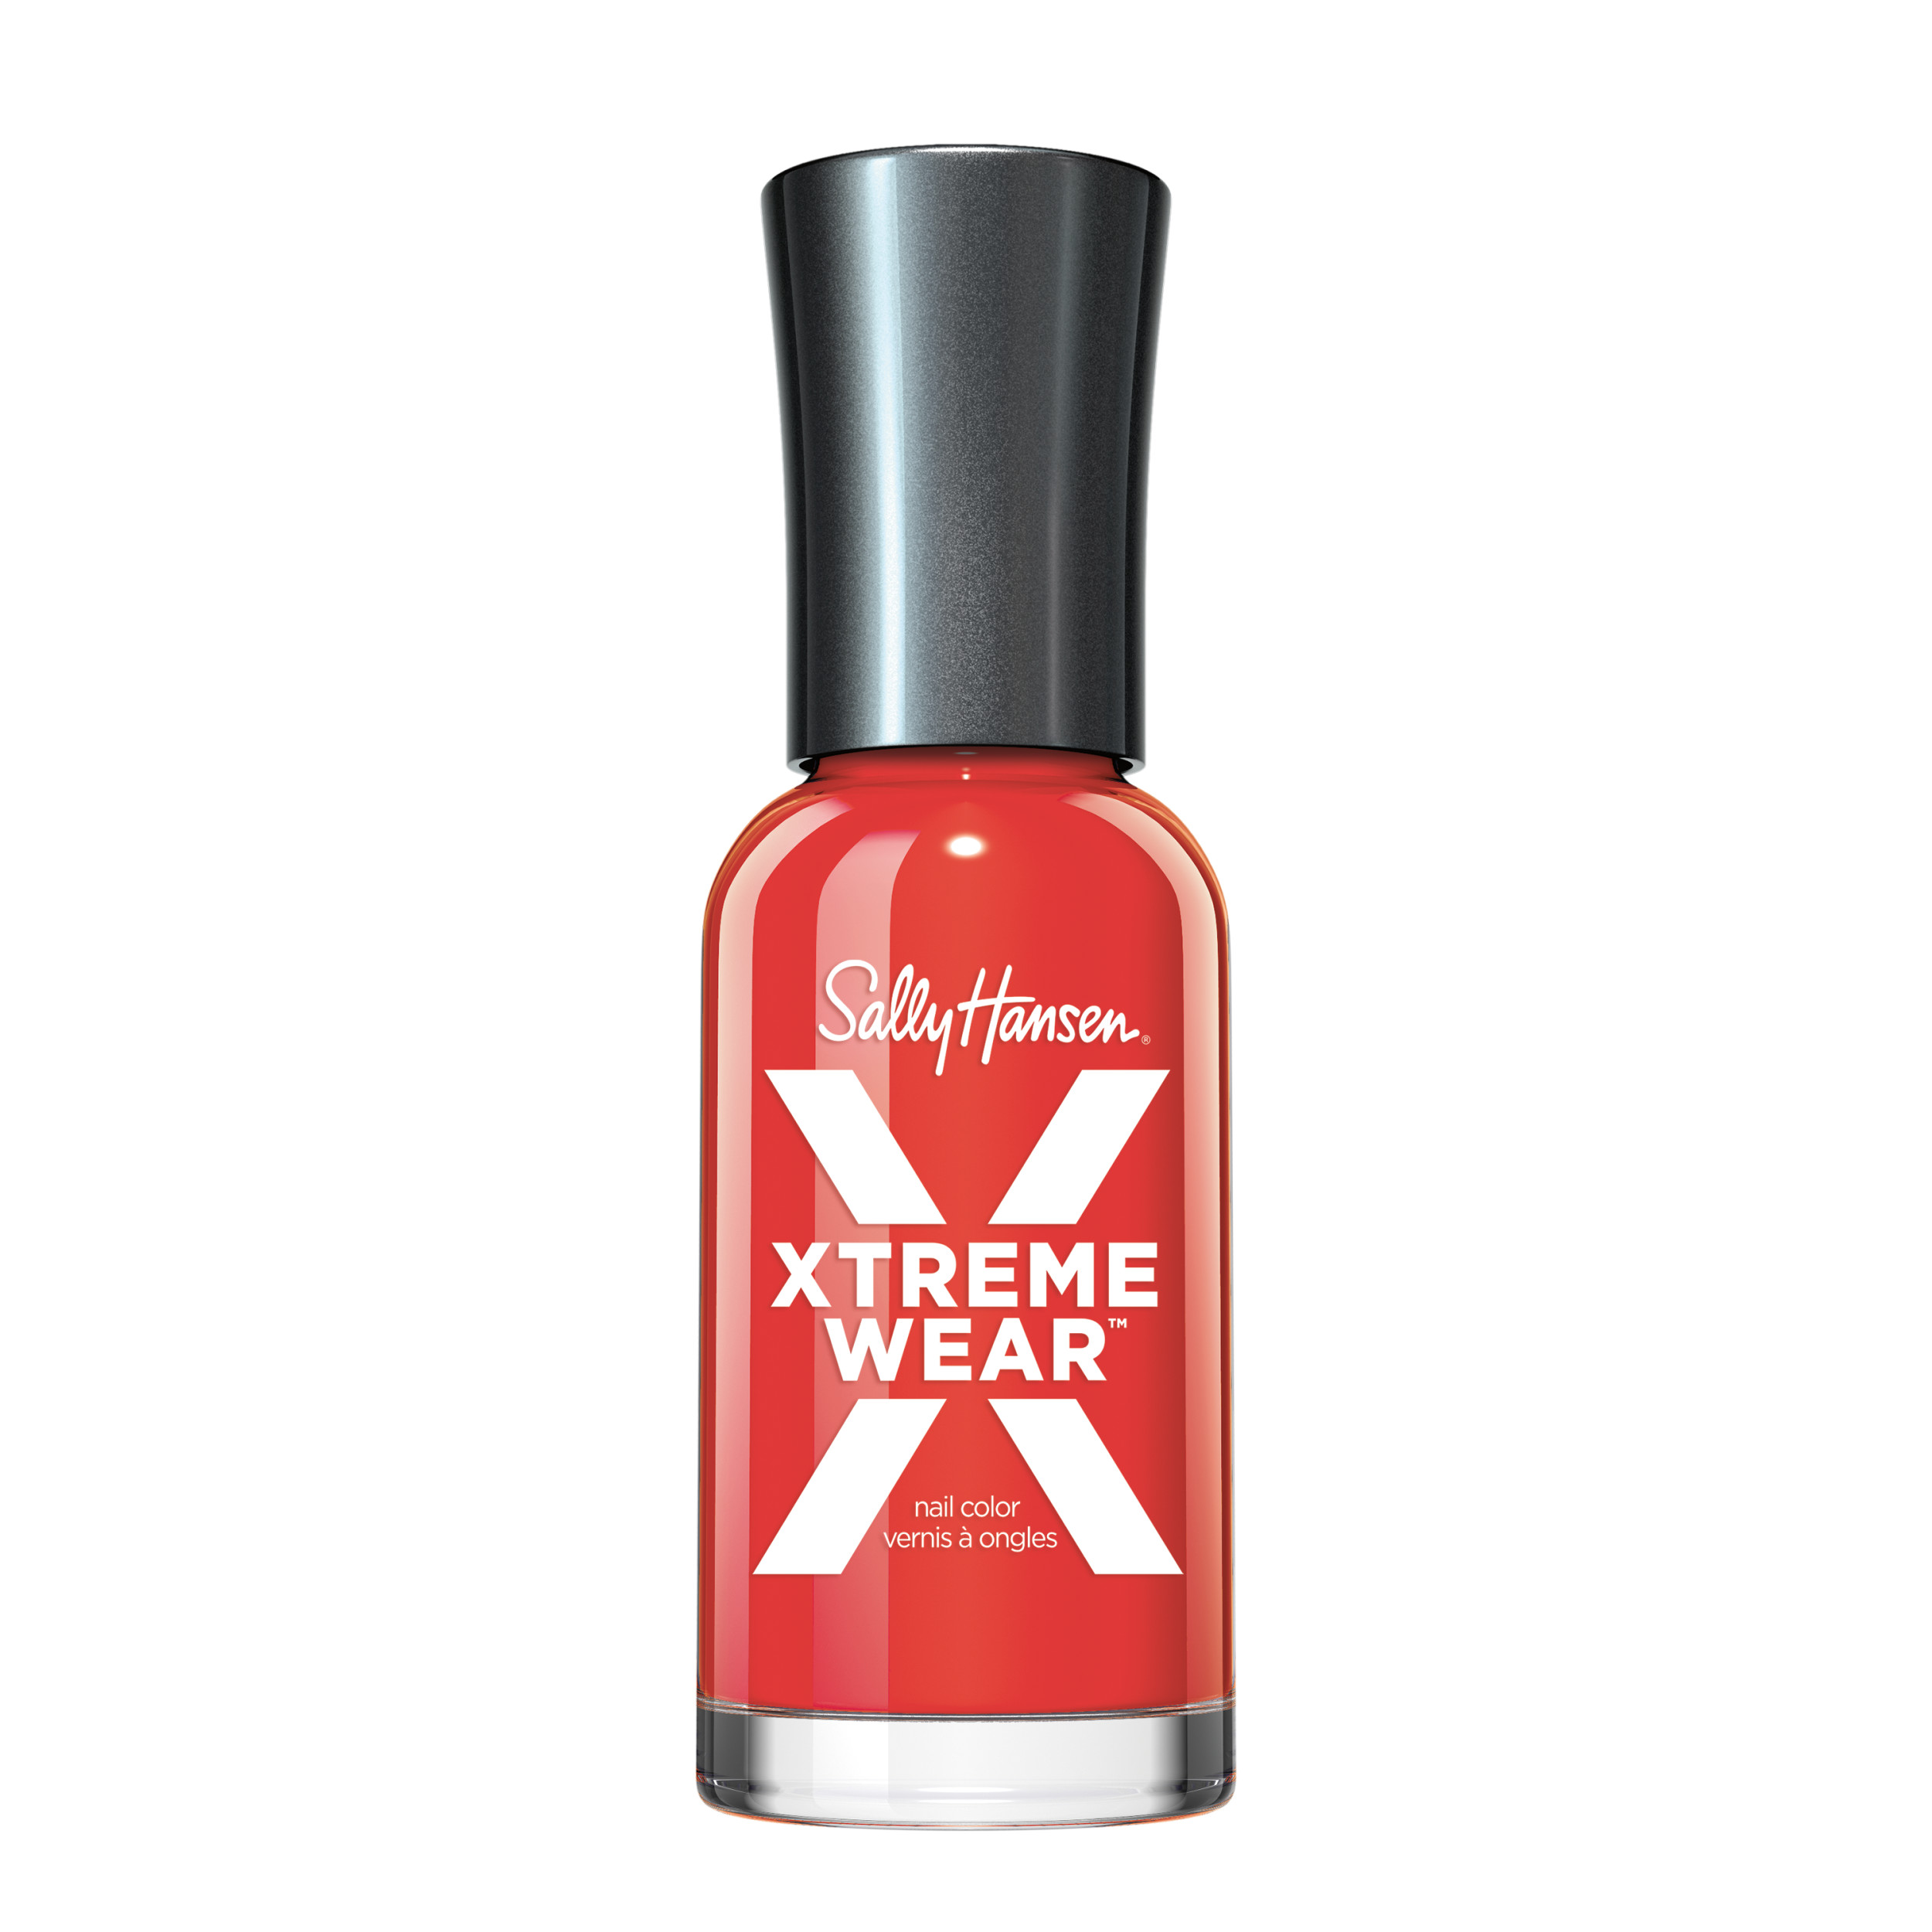 Sally Hansen Xtreme Wear Nail Polish, Selfie Red-y, 0.4 fl oz, Chip Resistant, Bold Color - image 1 of 14